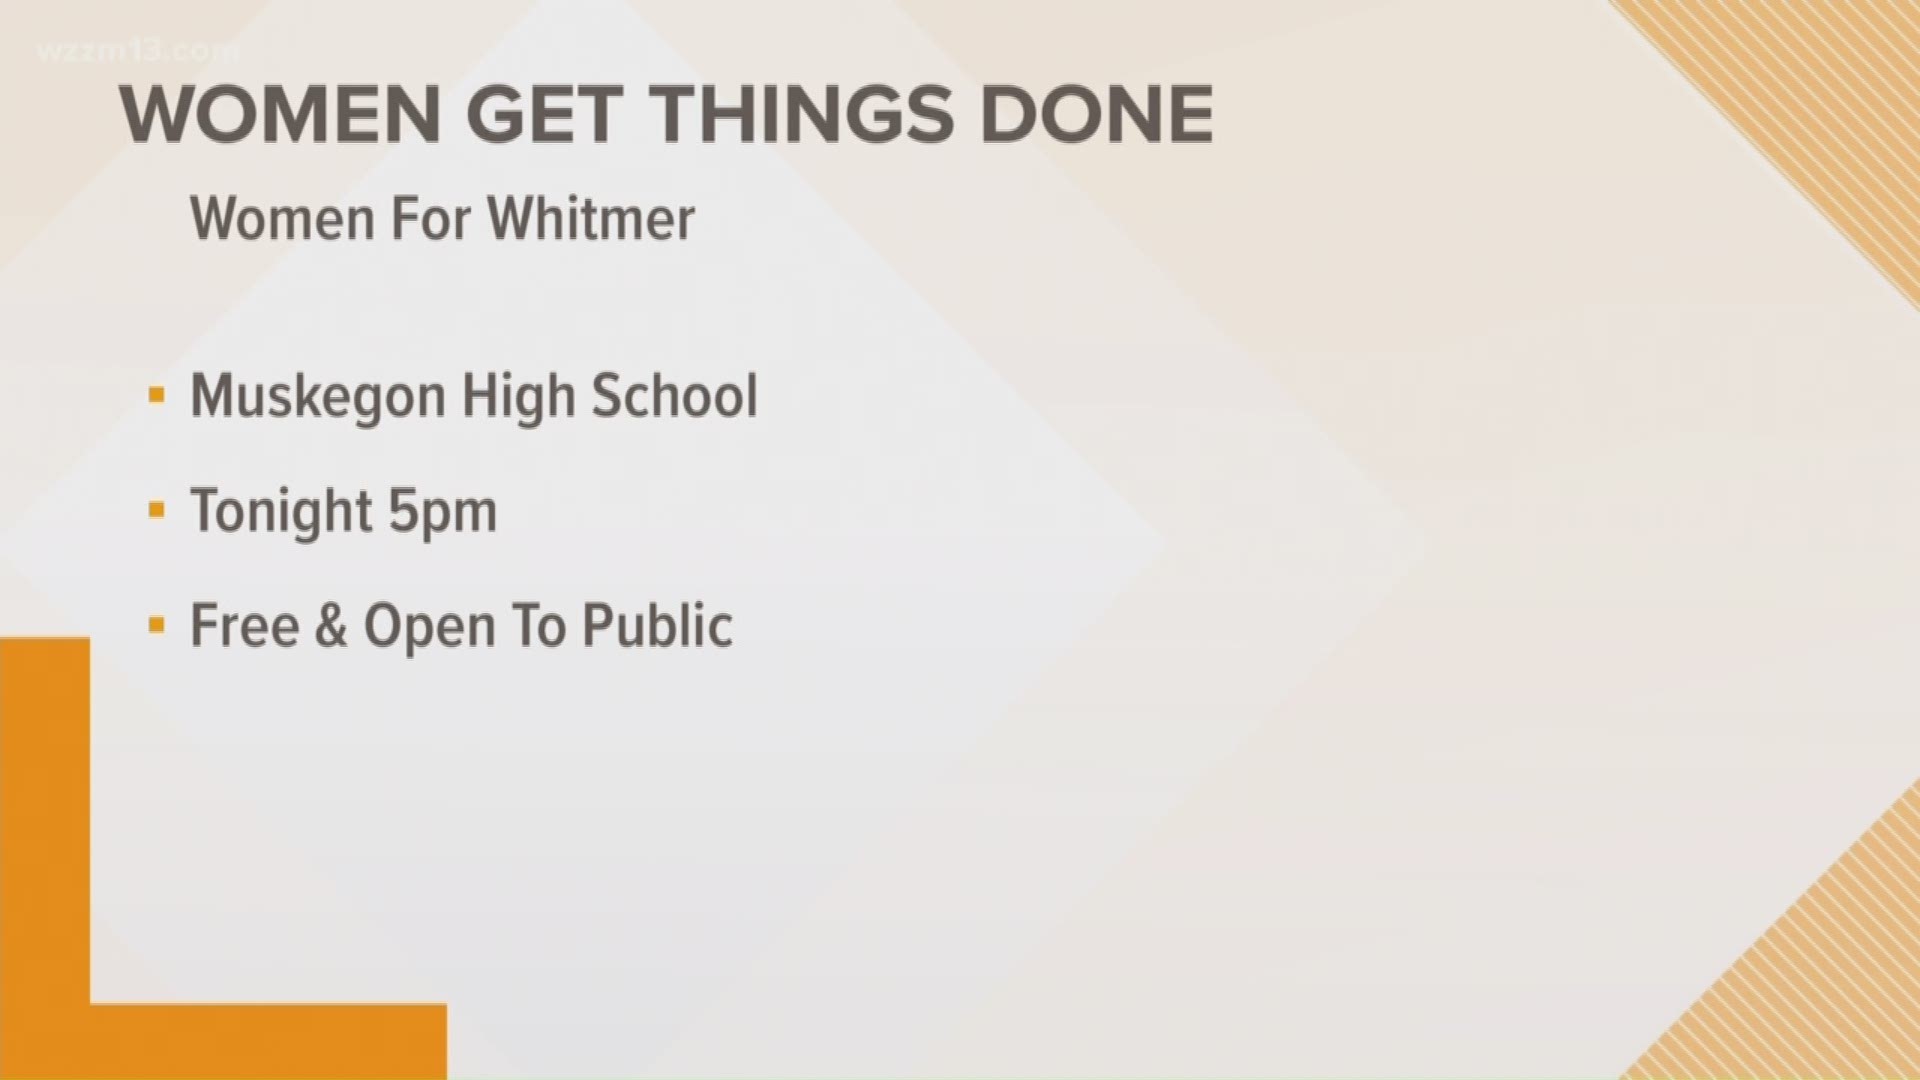 The "Women Get Things Done: Women for Whitmer Statewide Meeting" is at 5 p.m. Friday night inside the Muskegon High School auditorium.